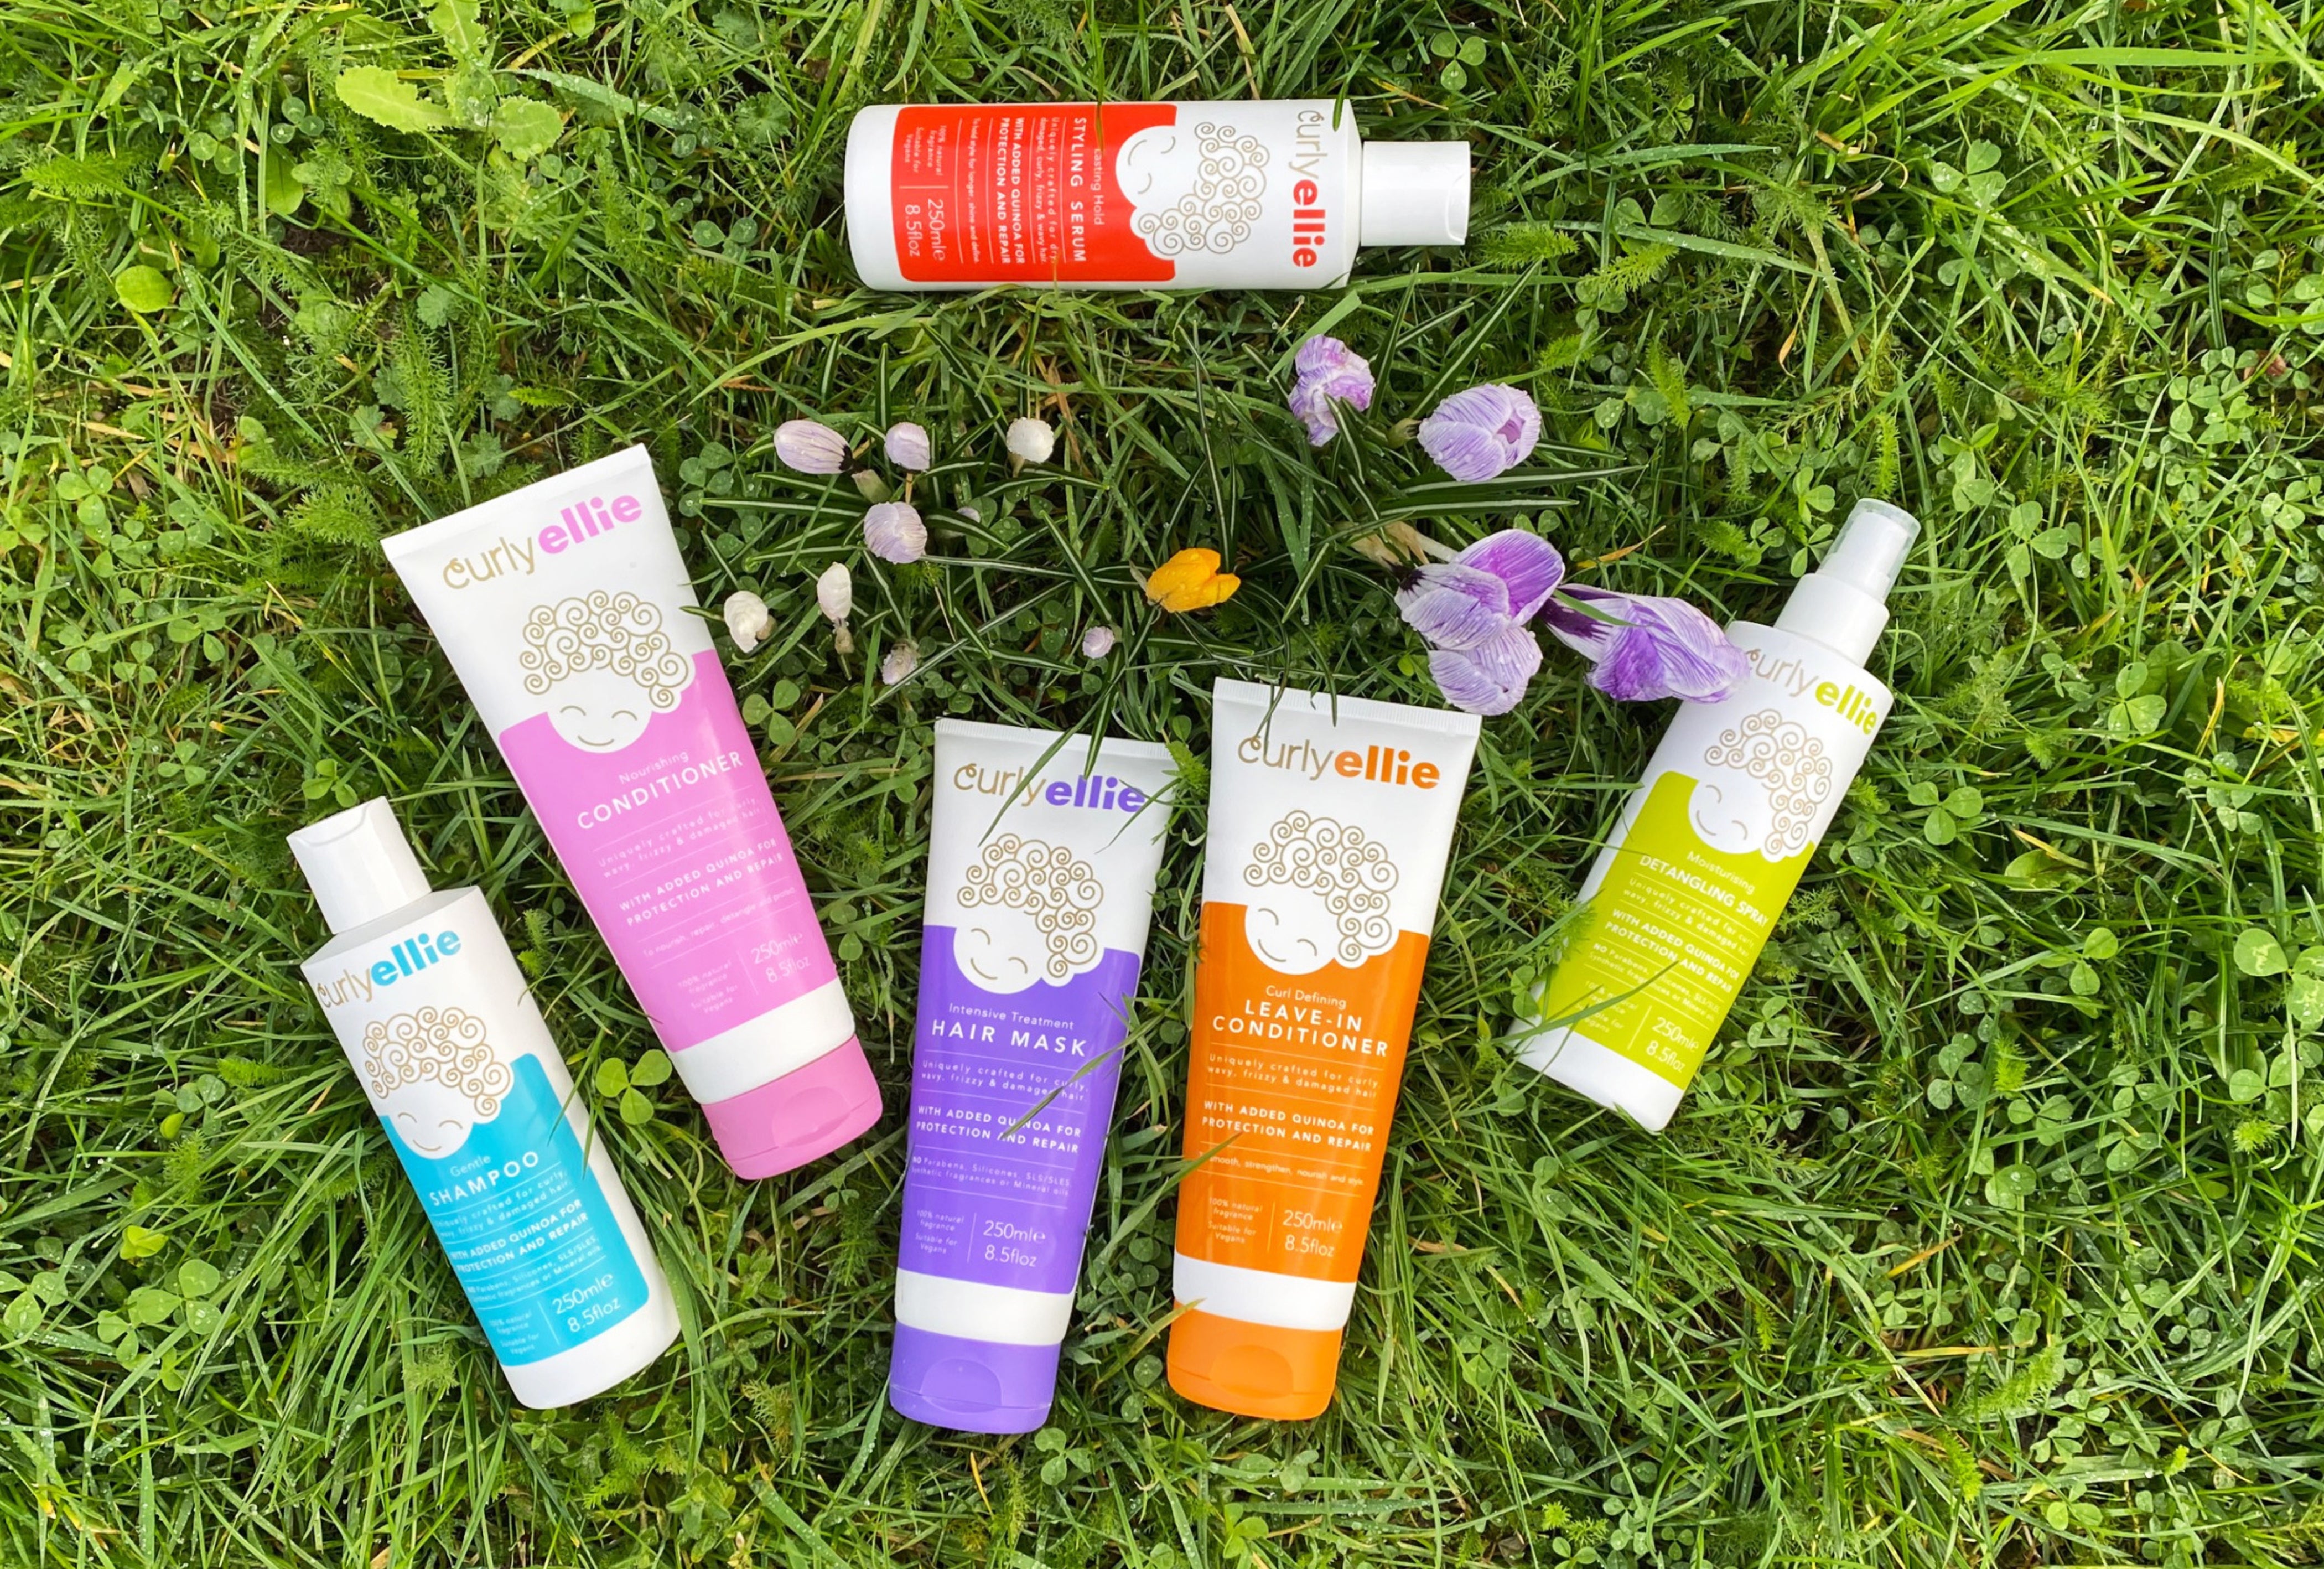 CurlyEllie Full line - products suitable for kids